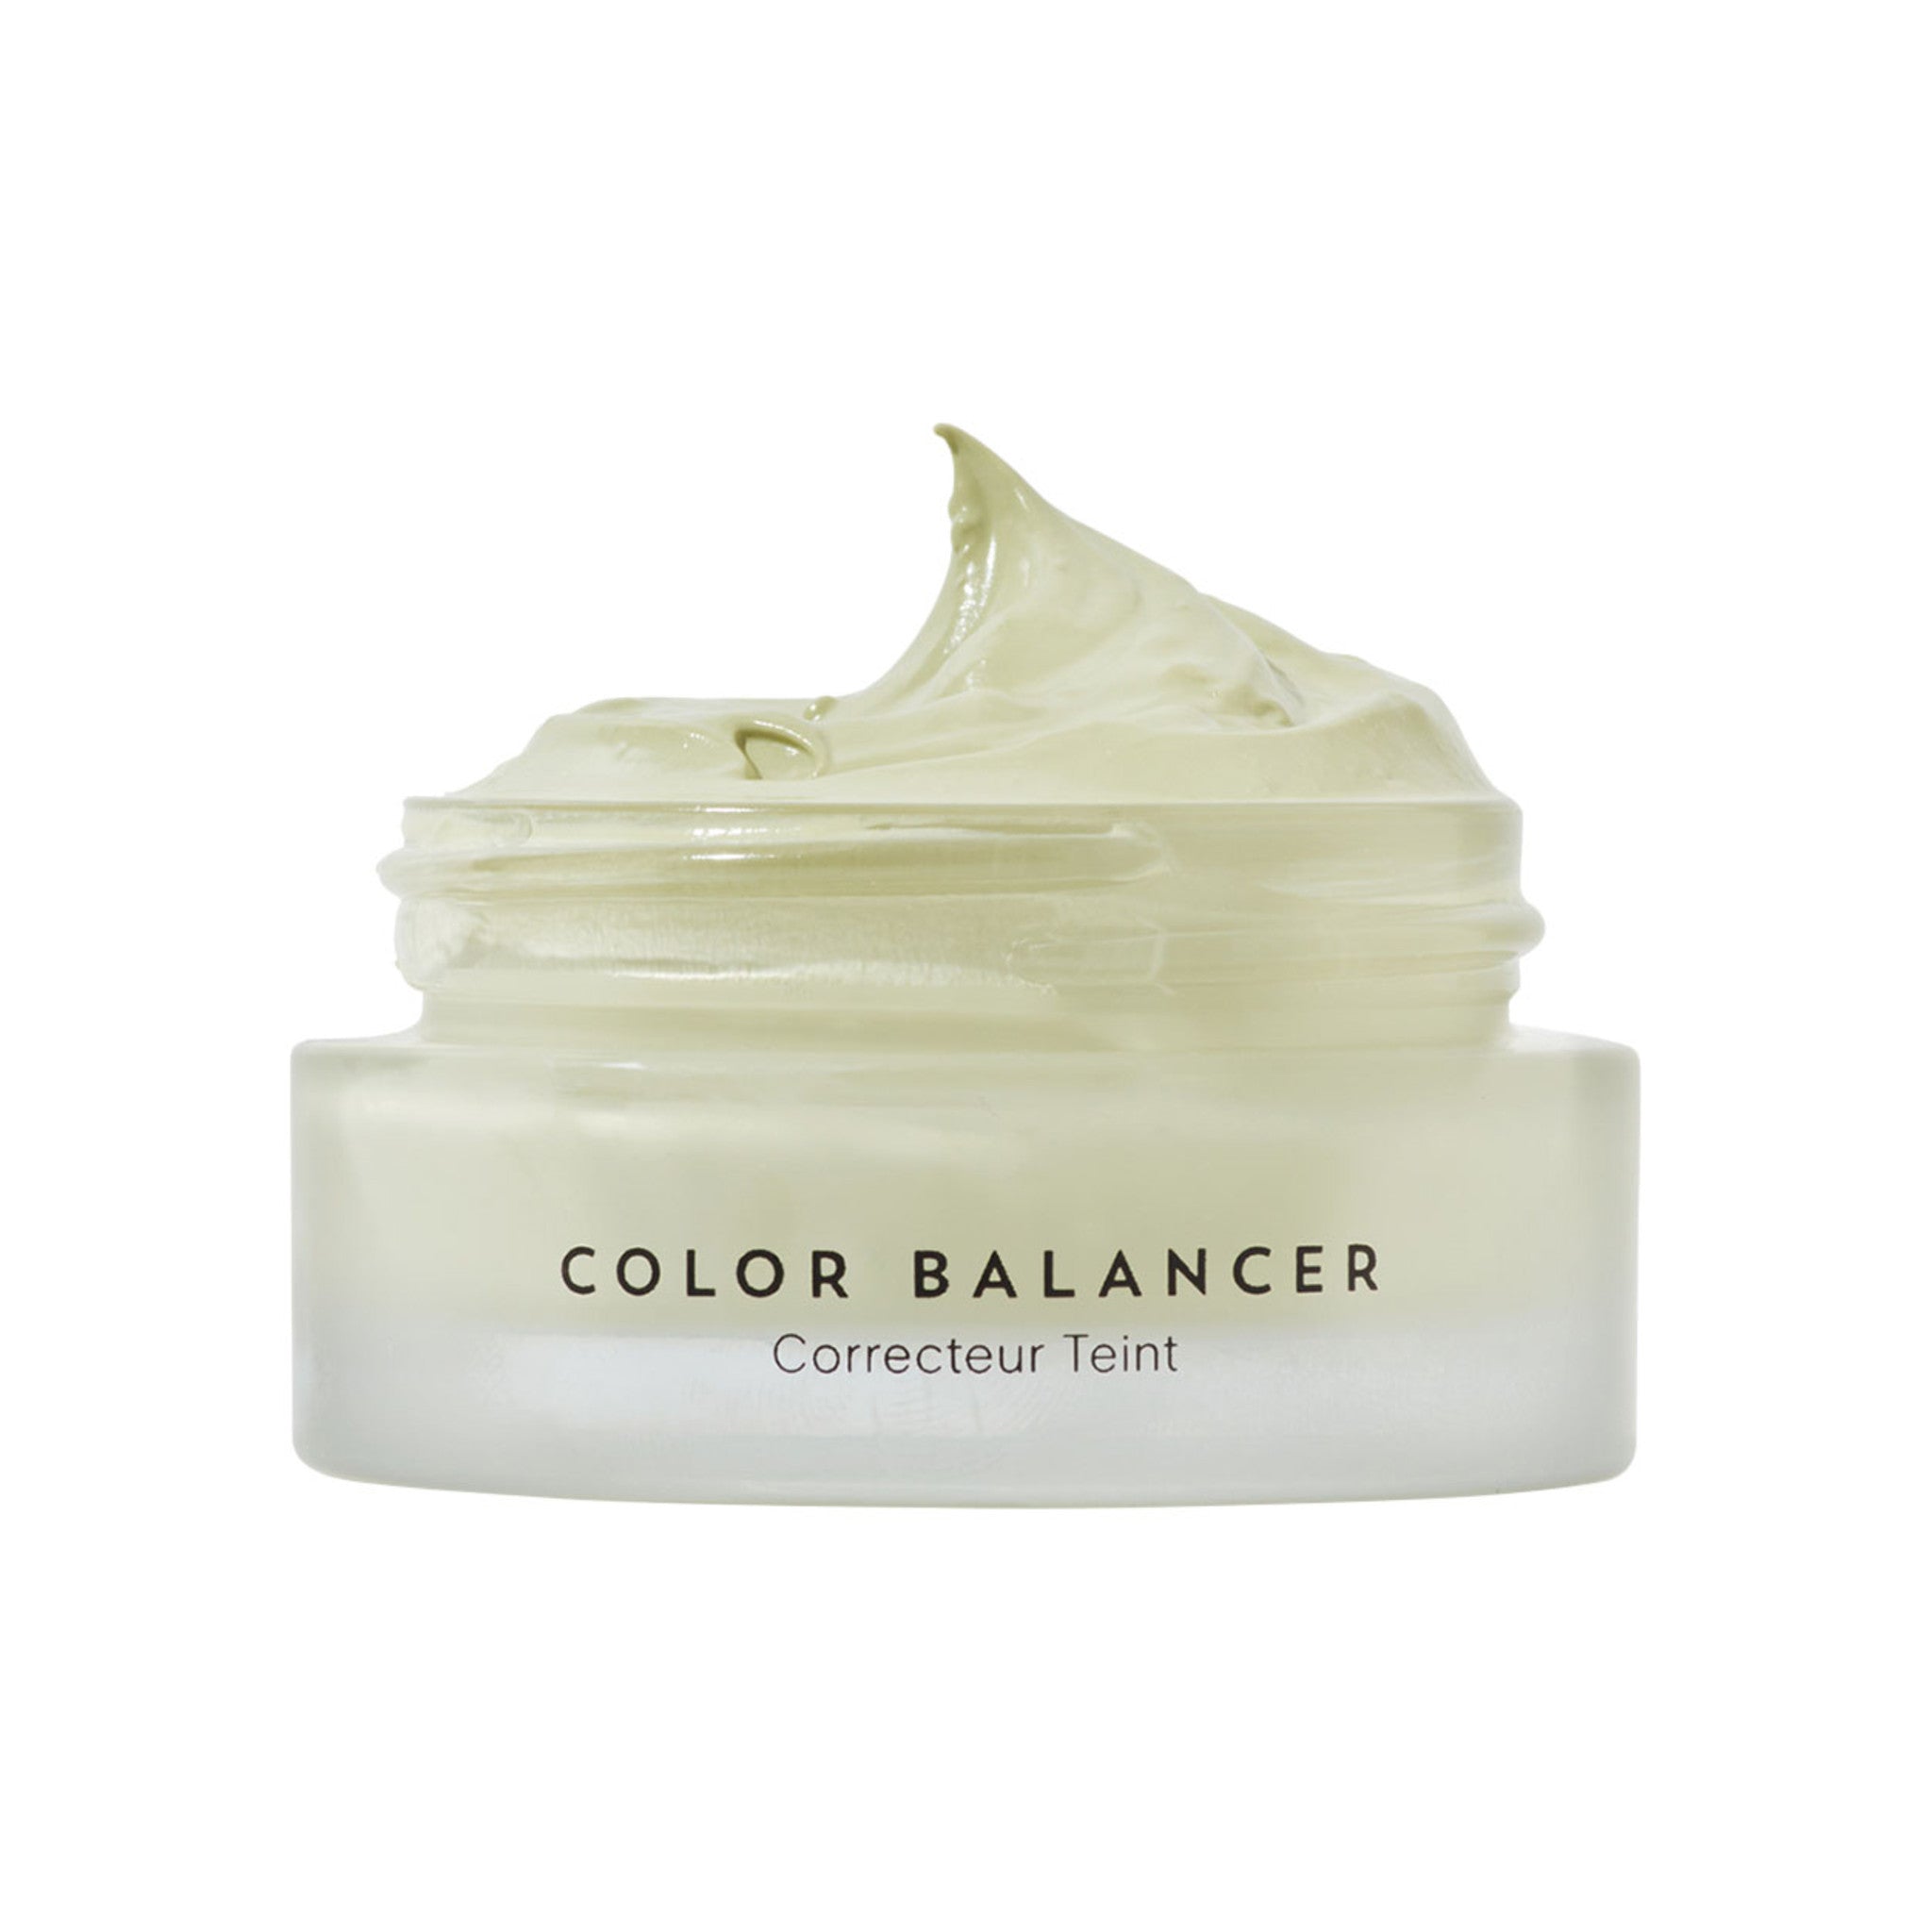 Indie Lee Color Balancer main image. This product is for light complexions